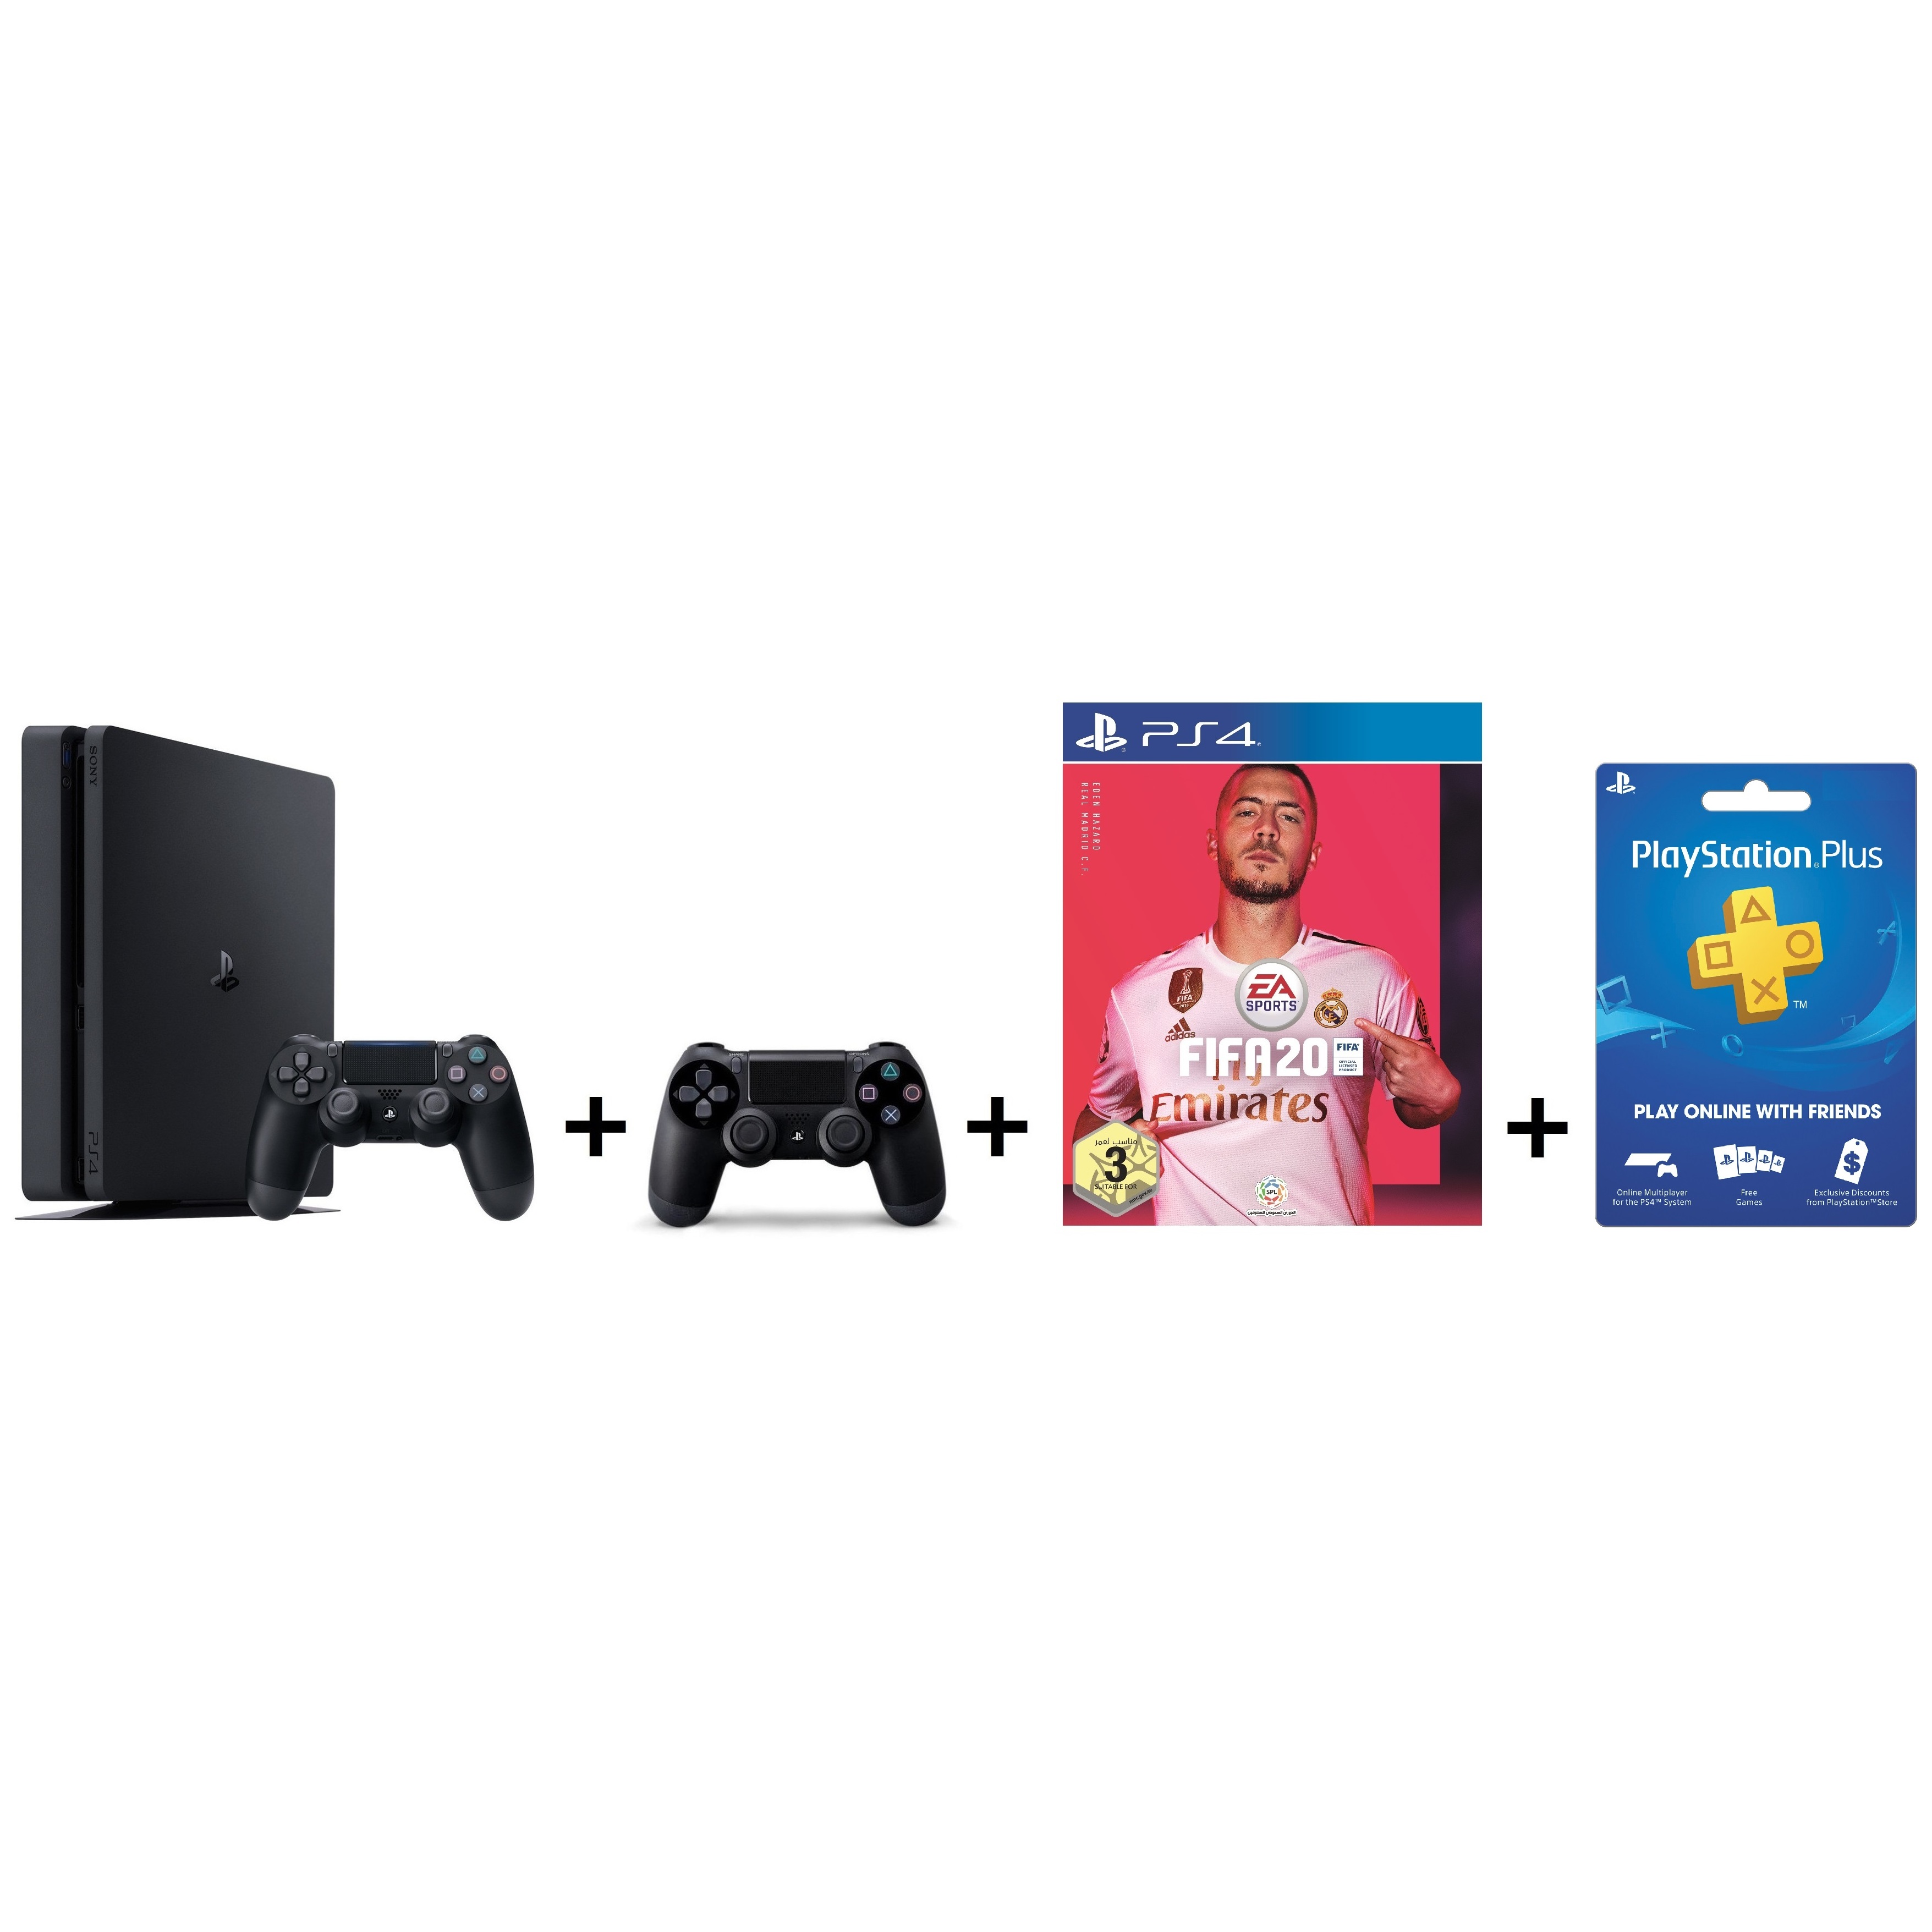 Sony PS4 Slim Gaming 1TB Black + Extra Controller + FIFA20 Game + PlayStation Plus Membership Card Bahrain, Buy Sony PS4 Slim Gaming Console 1TB Black + Extra Controller +